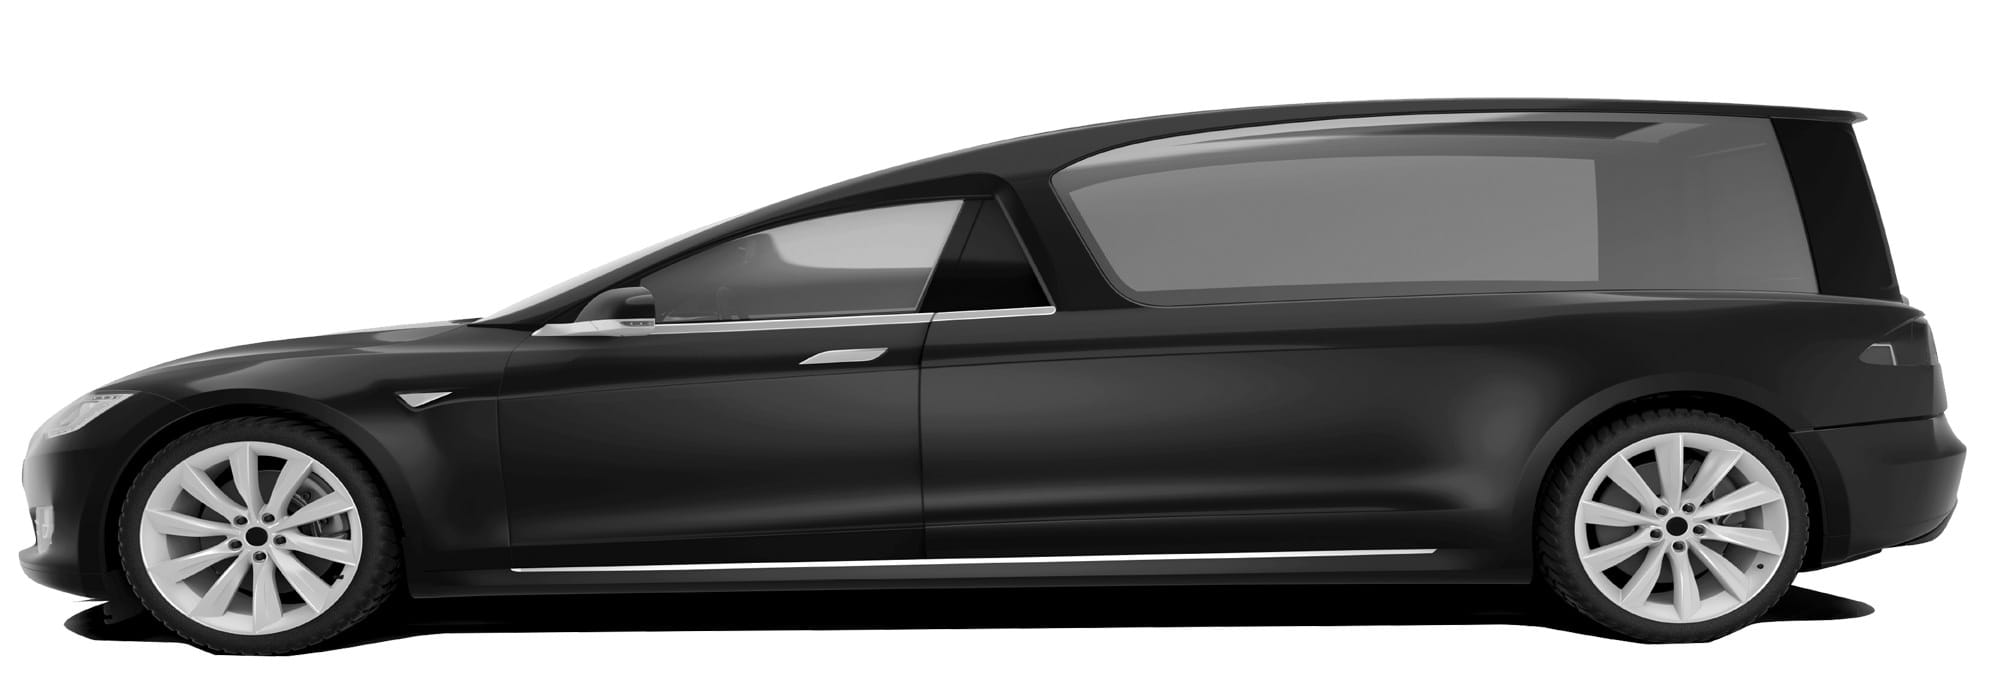 Premium Electric Hearse with Extended Wheelbase (Tesla S)